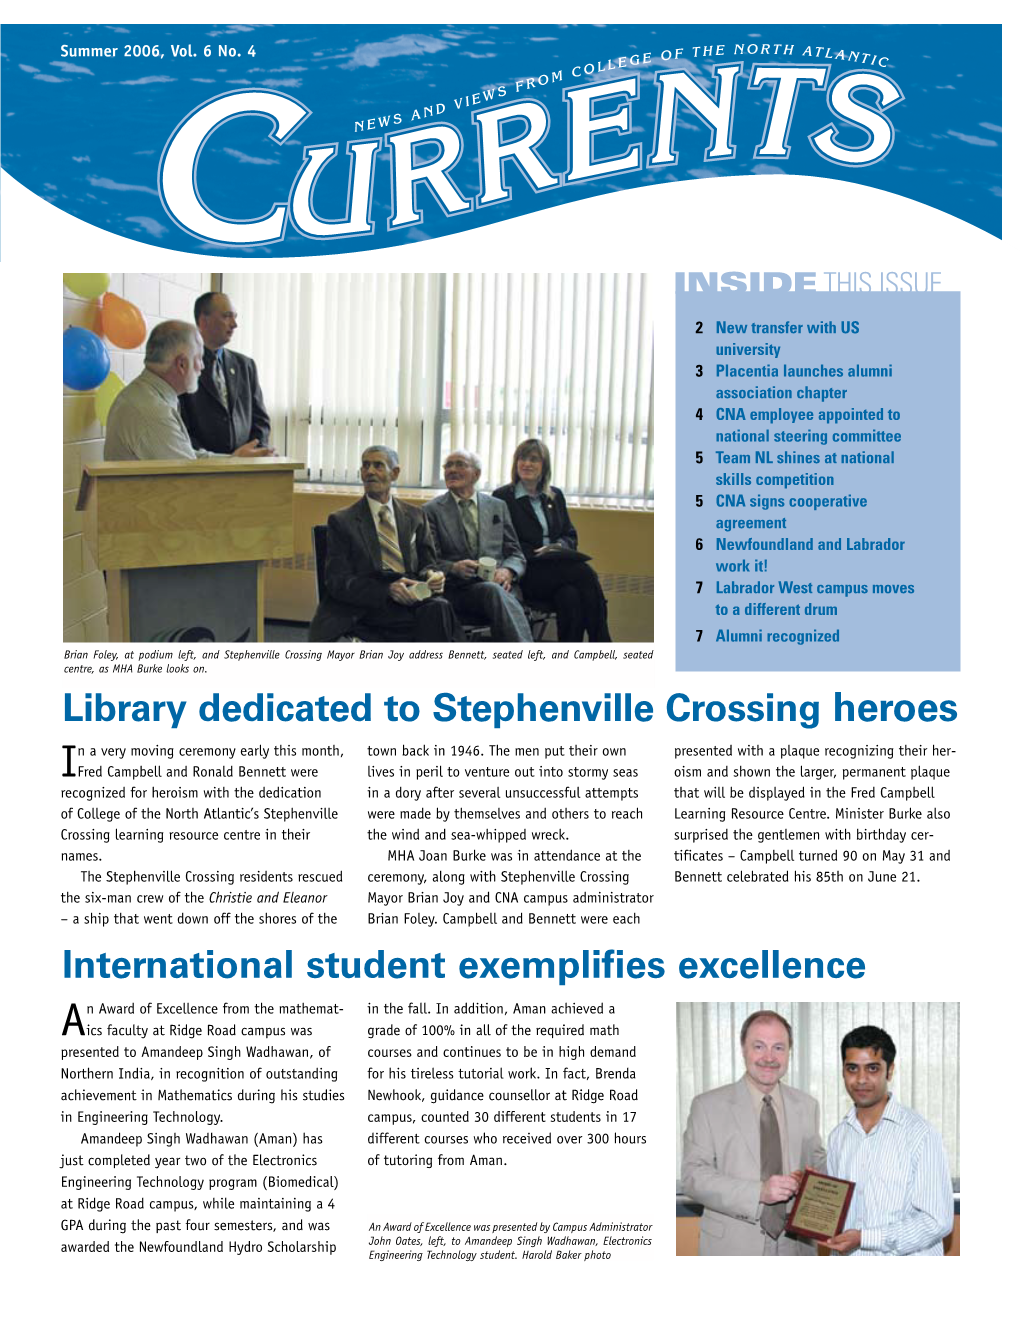 Library Dedicated to Stephenville Crossing Heroes International Student Exemplifies Excellence